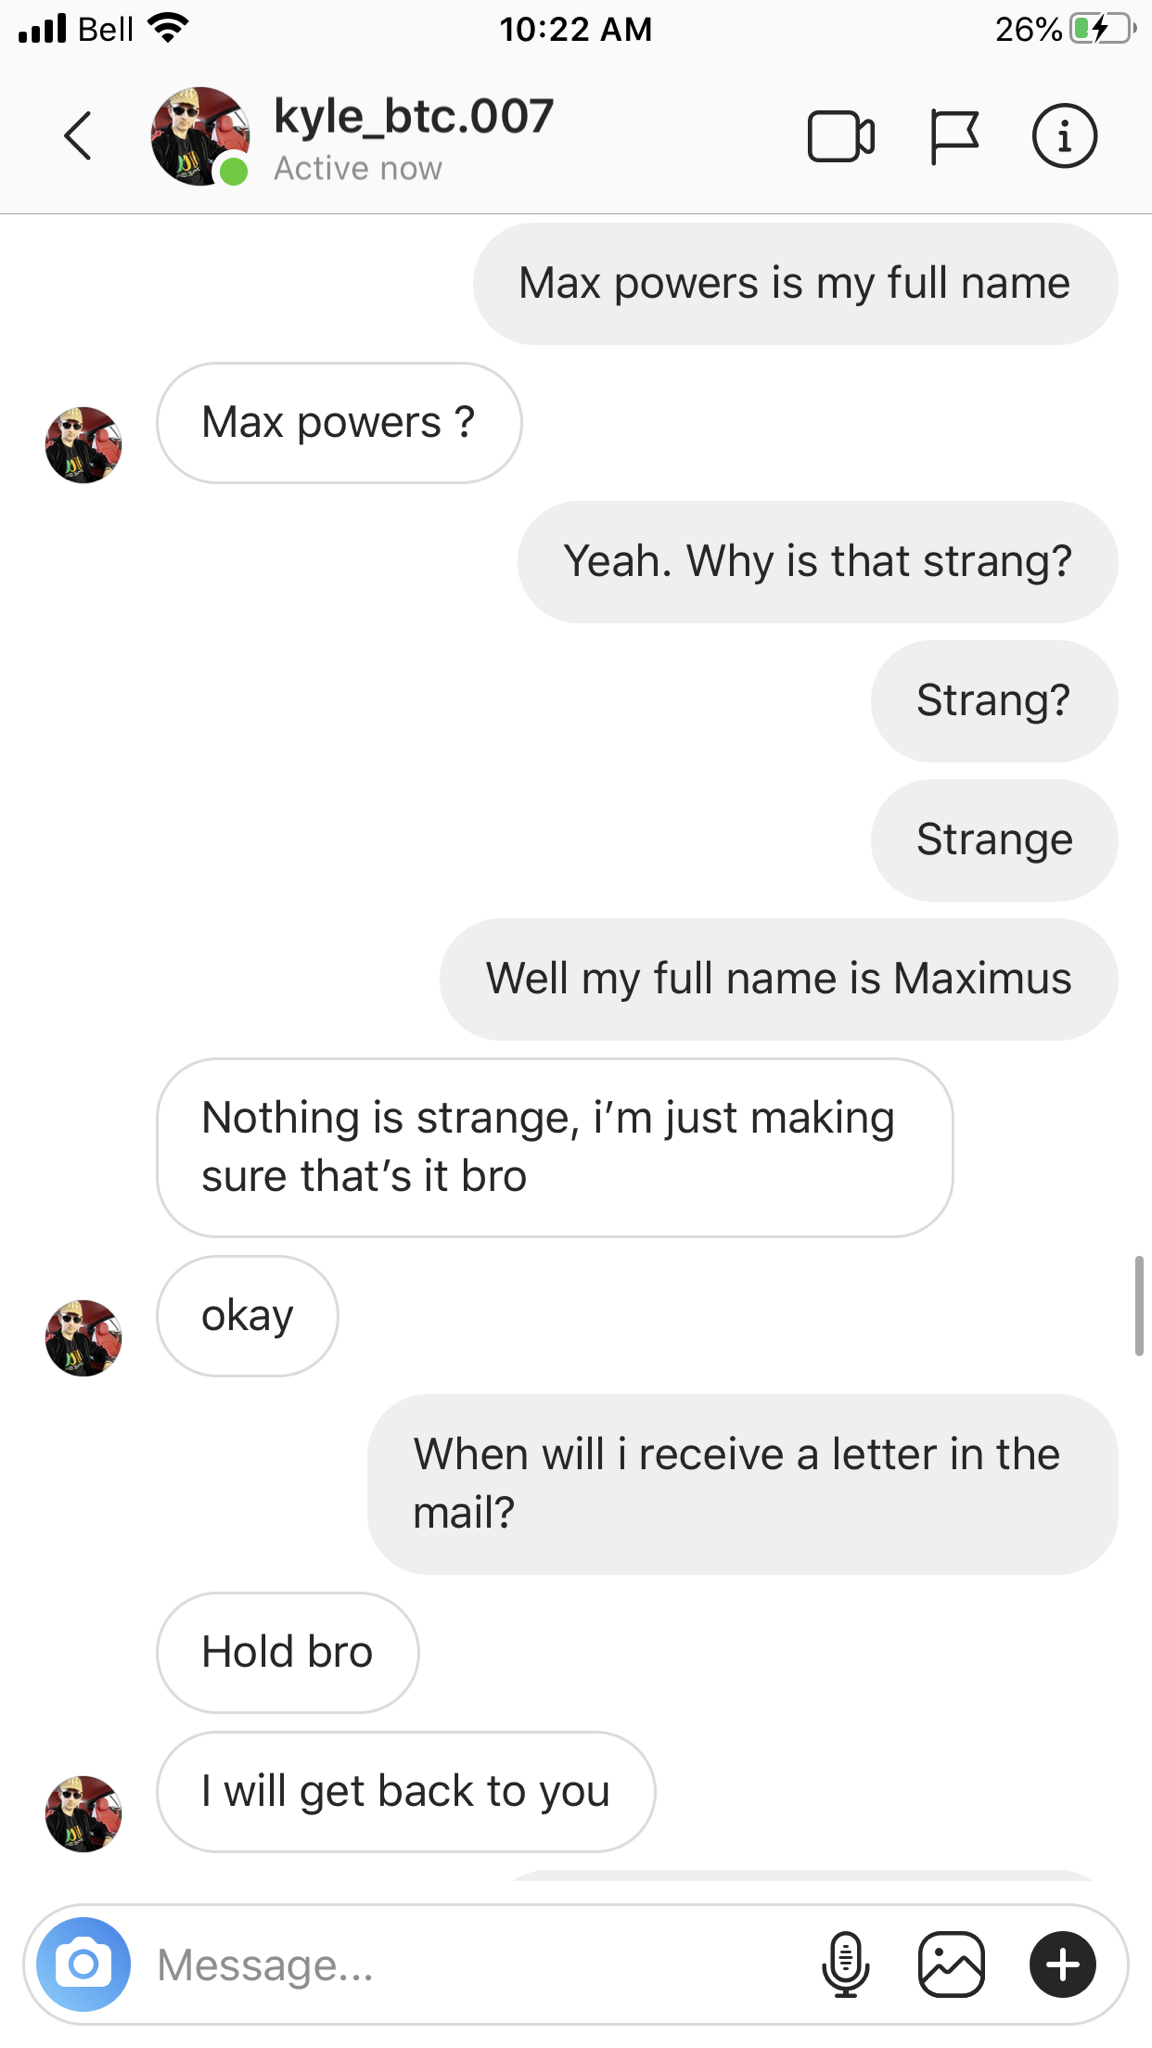 screenshot - il Bell 26% kyle_btc.007 Max powers is my full name Max powers? Yeah. Why is that strang? Strang? Strange Well my full name is Maximus Nothing is strange, i'm just making sure that's it bro okay When will i receive a letter in the mail? Hold 